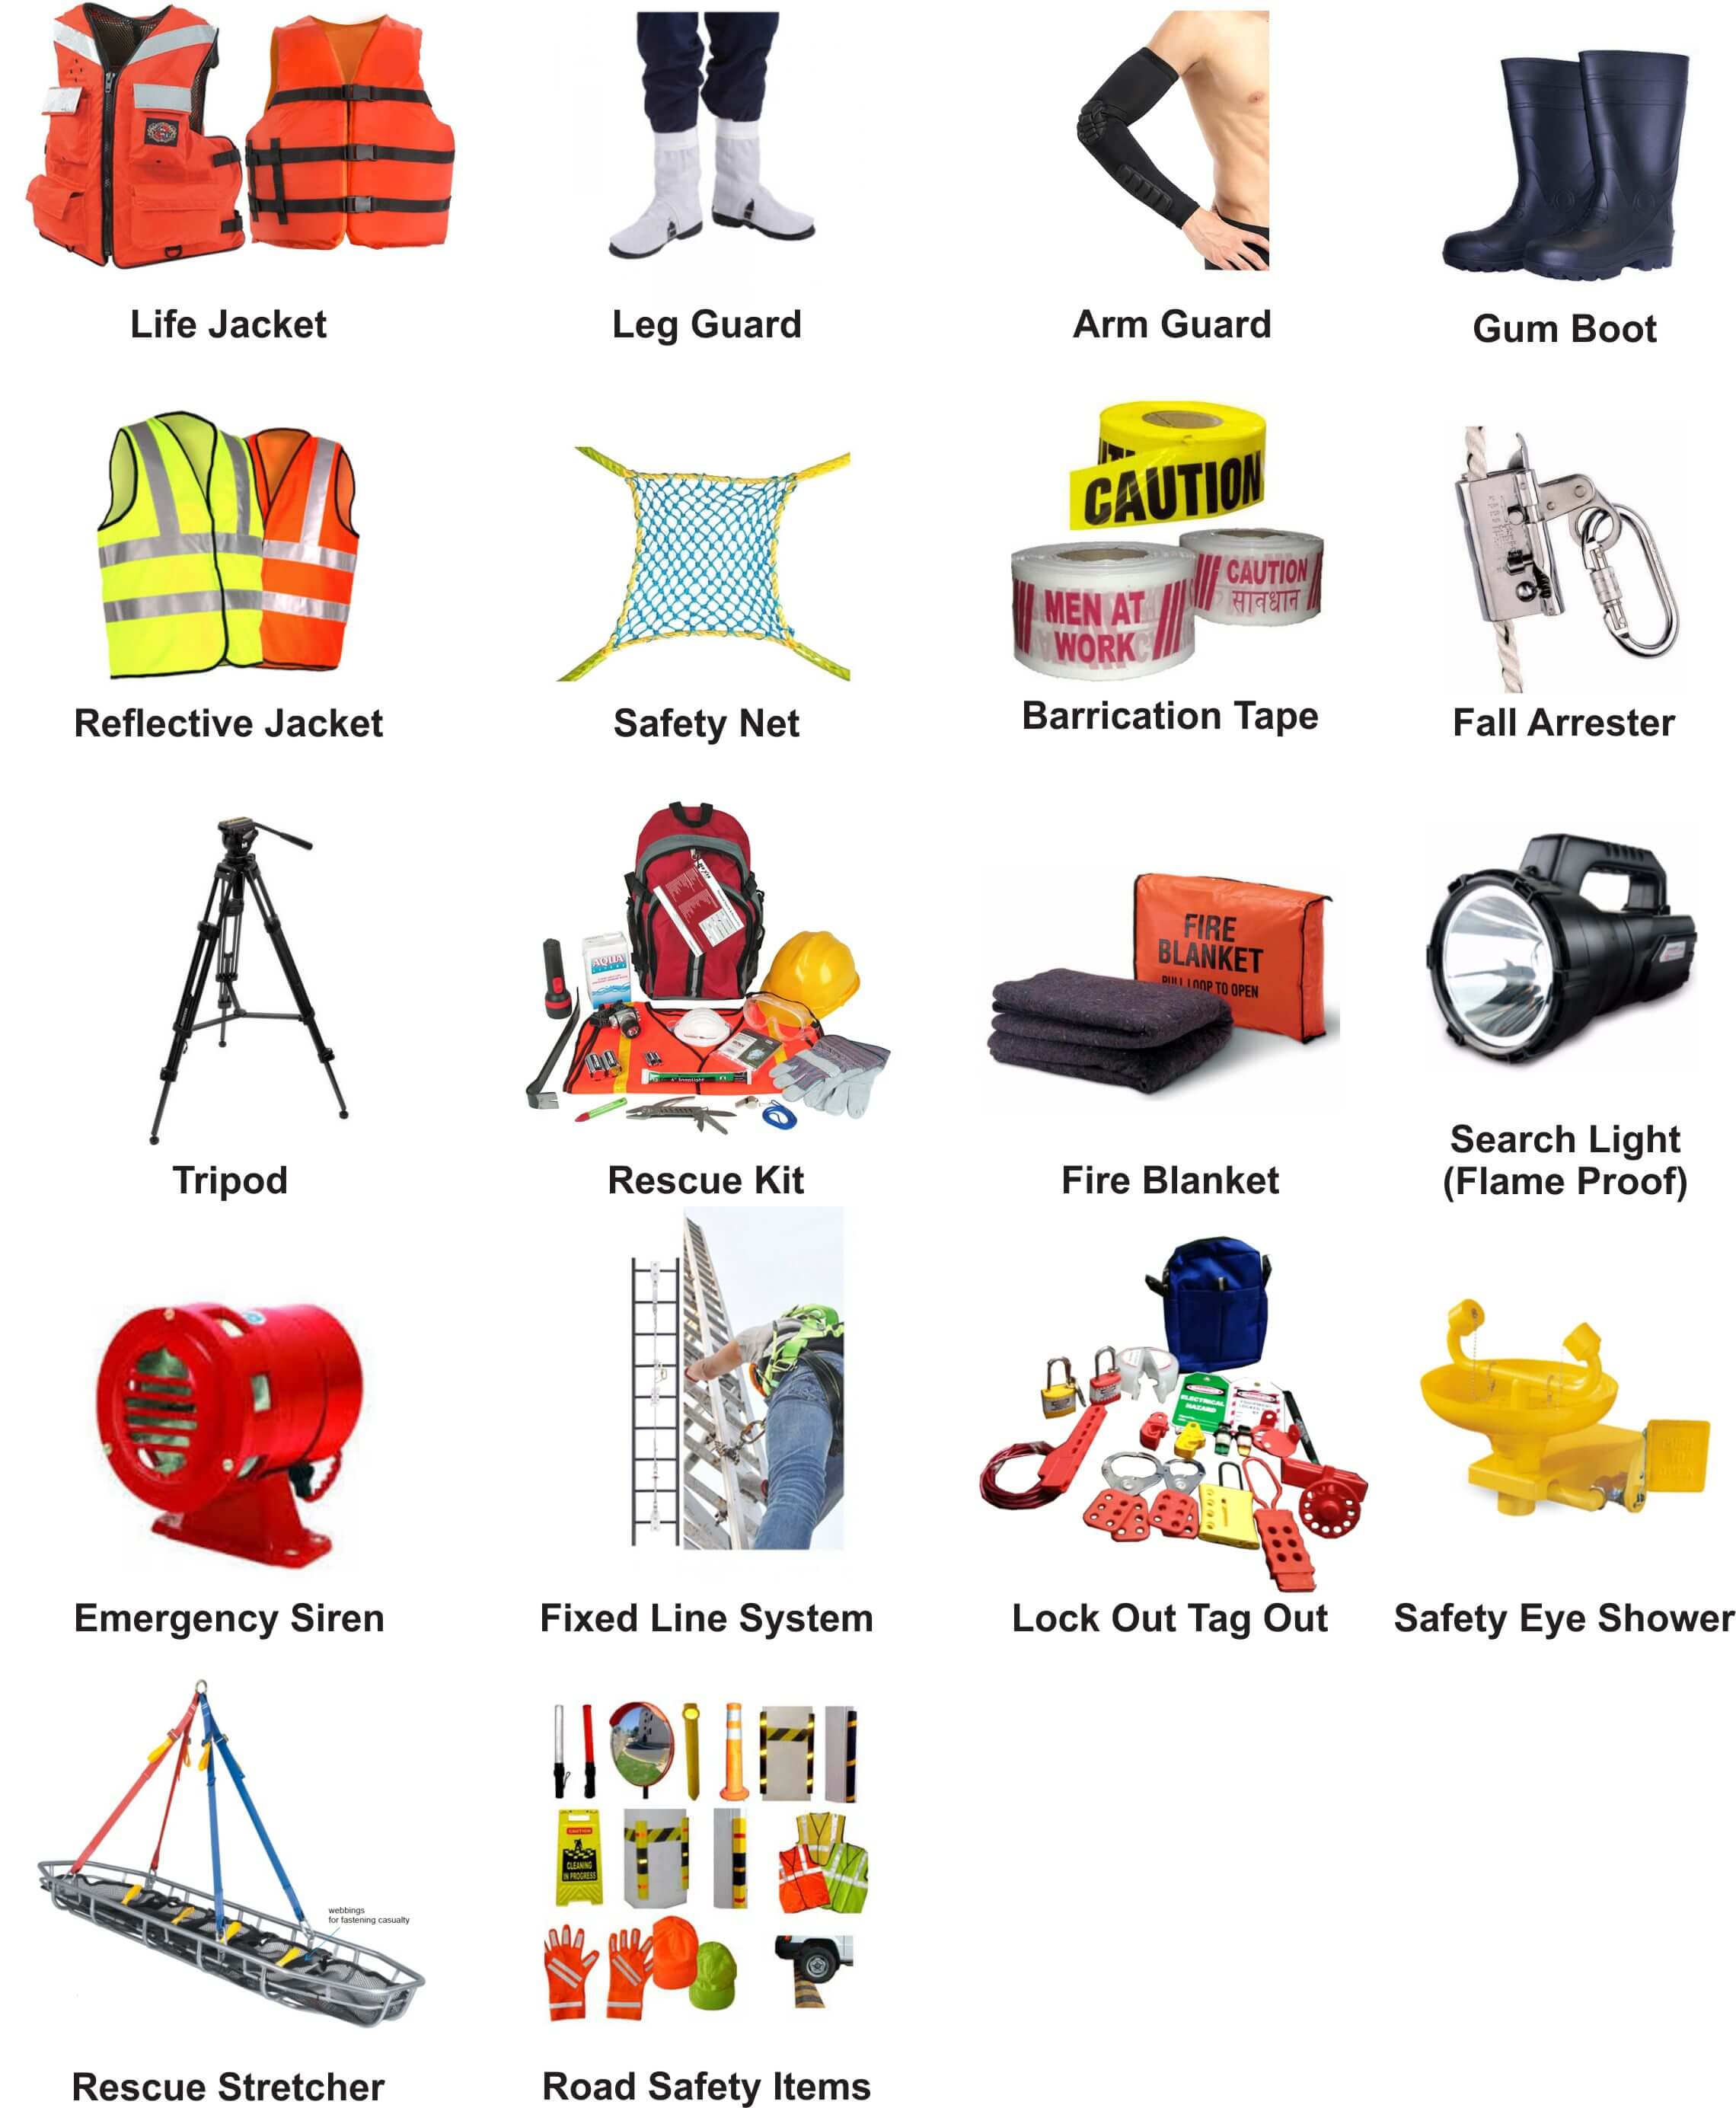 Other Safety Accessories